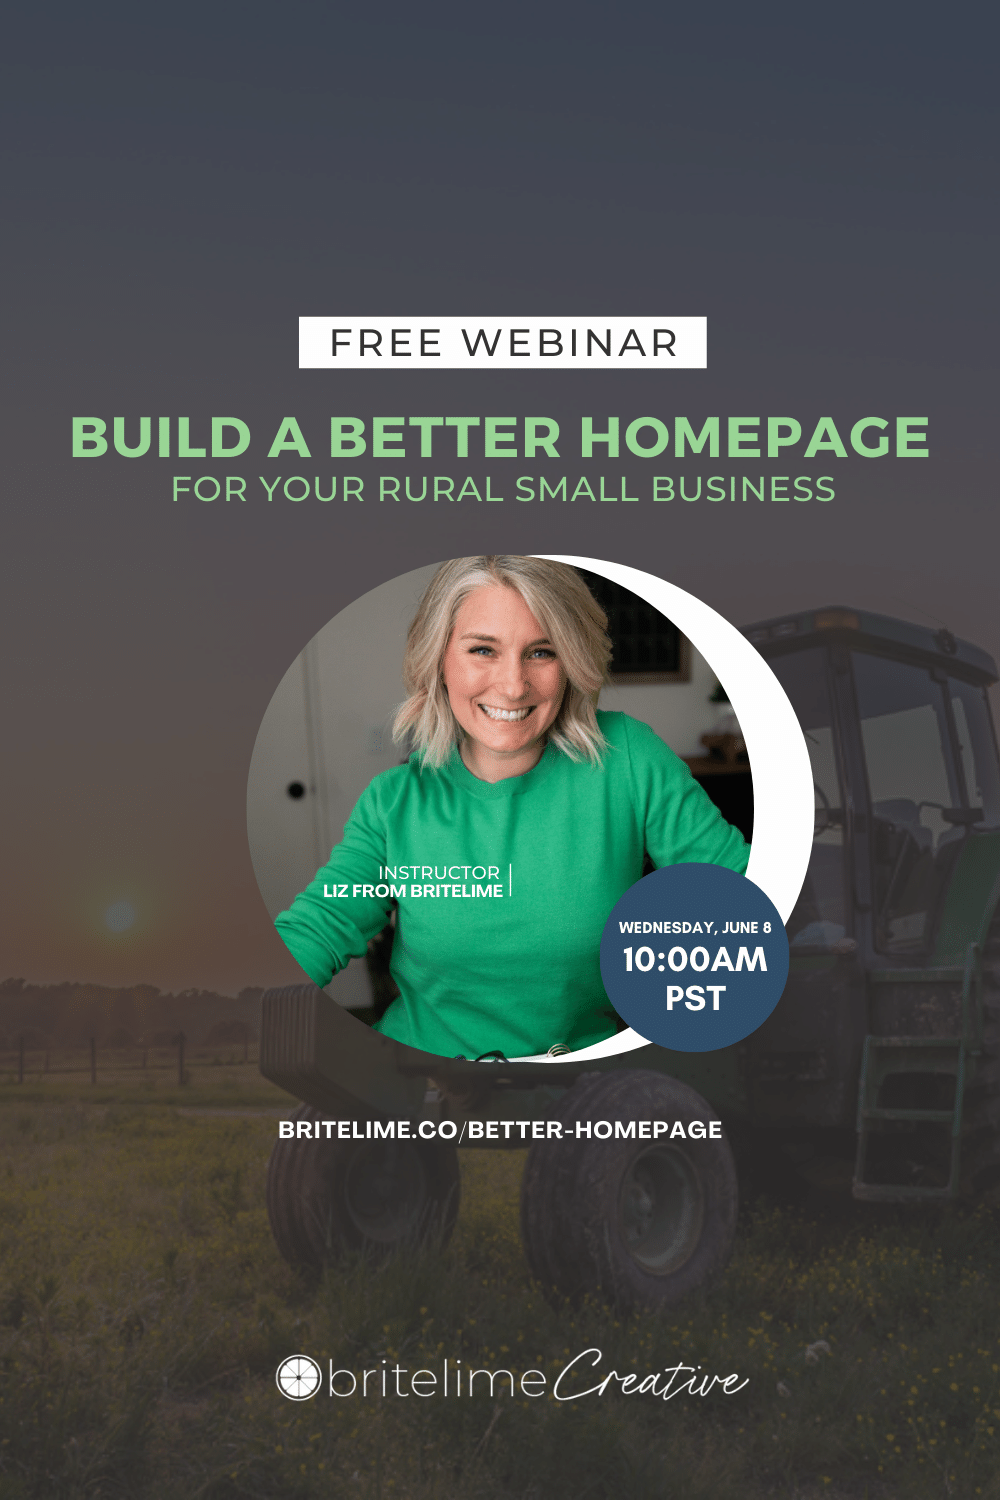 Promo graphic for the Build a Better Homepage Free Webinar. Includes photo of Liz from britelime and webinar details.